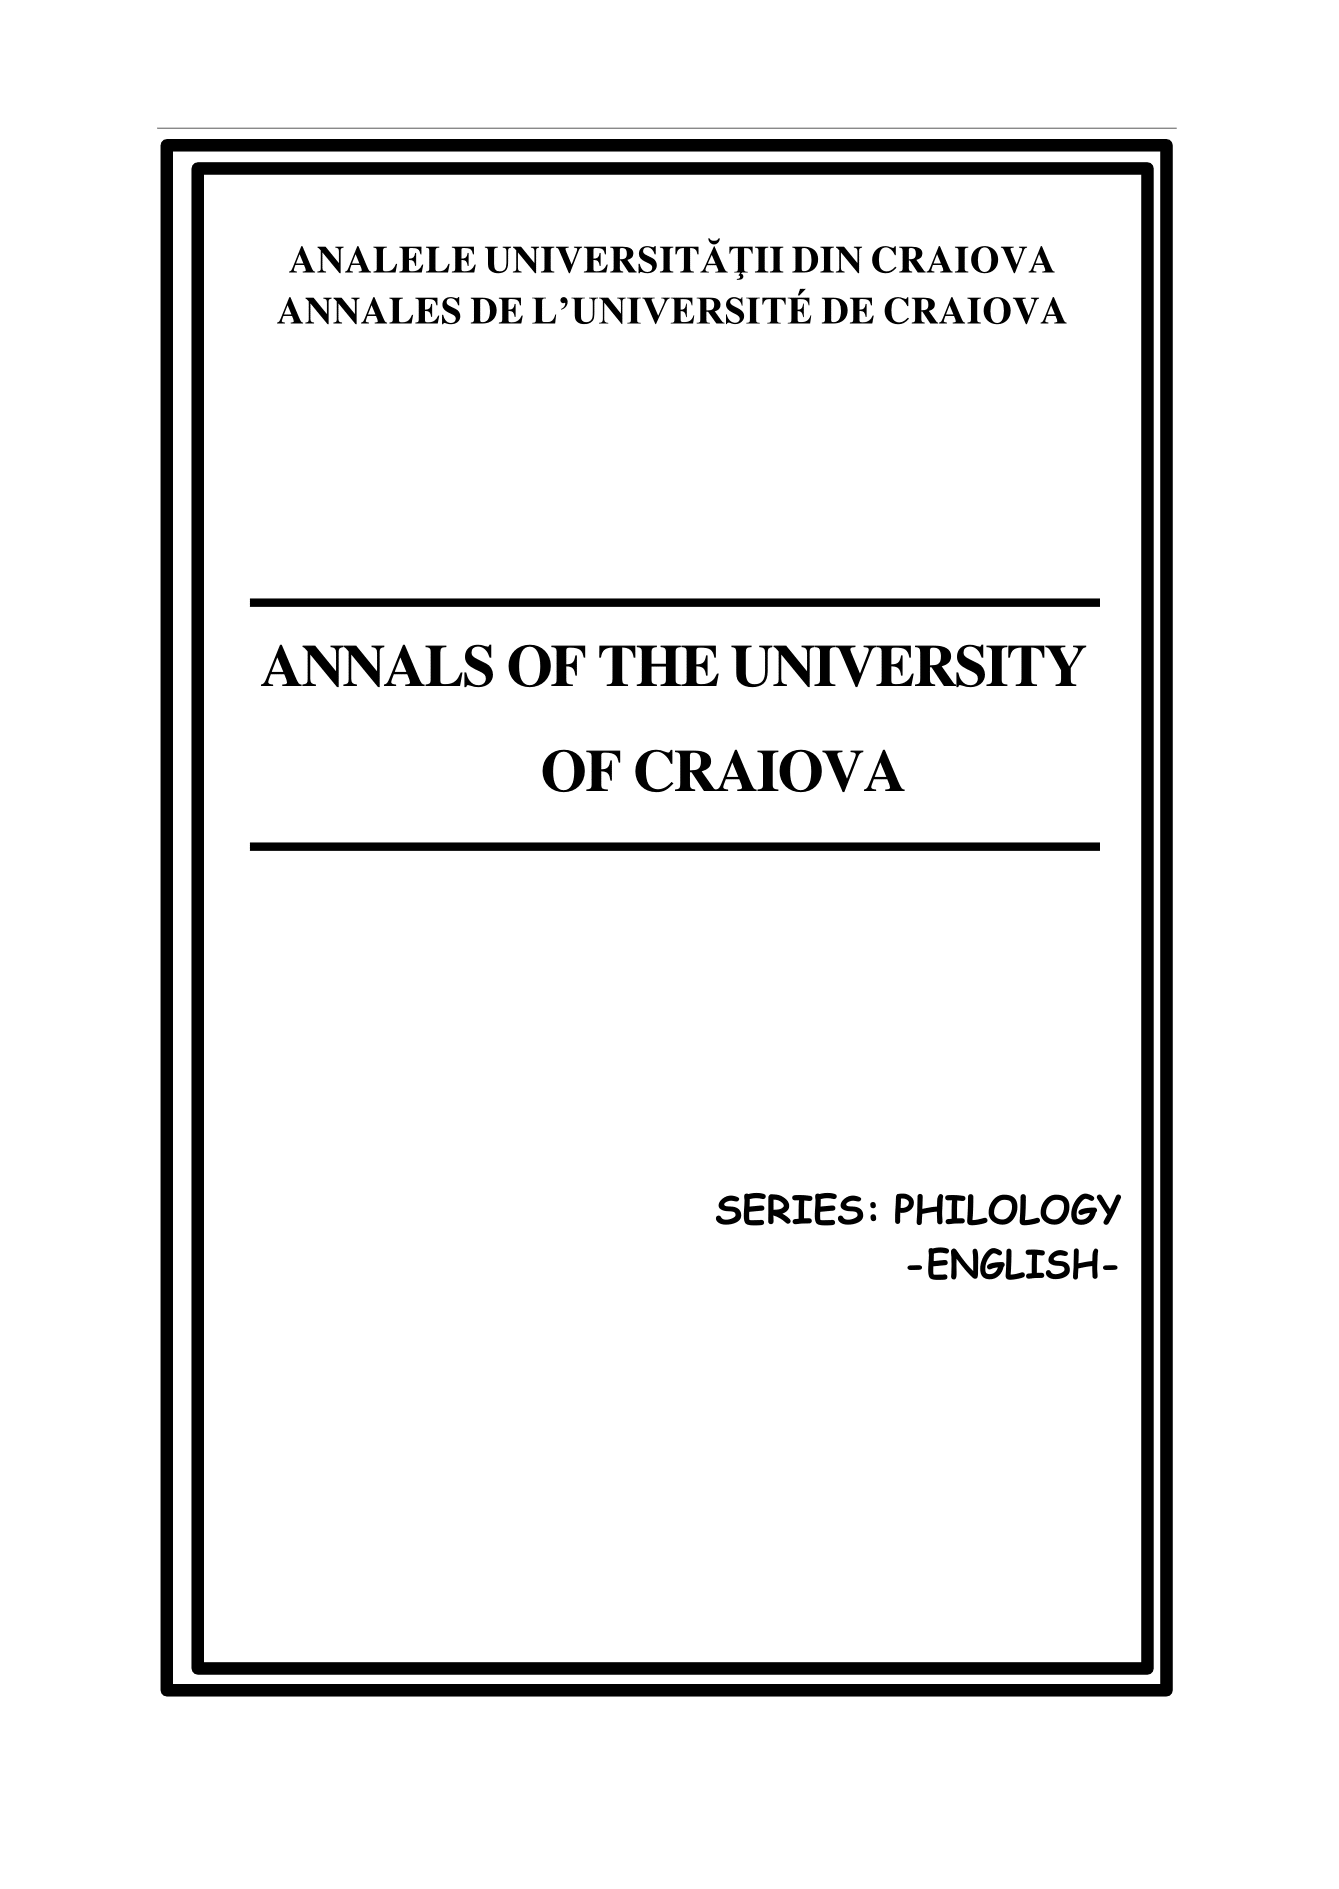 Annals of the University of Craiova, Series: Philology, English Cover Image